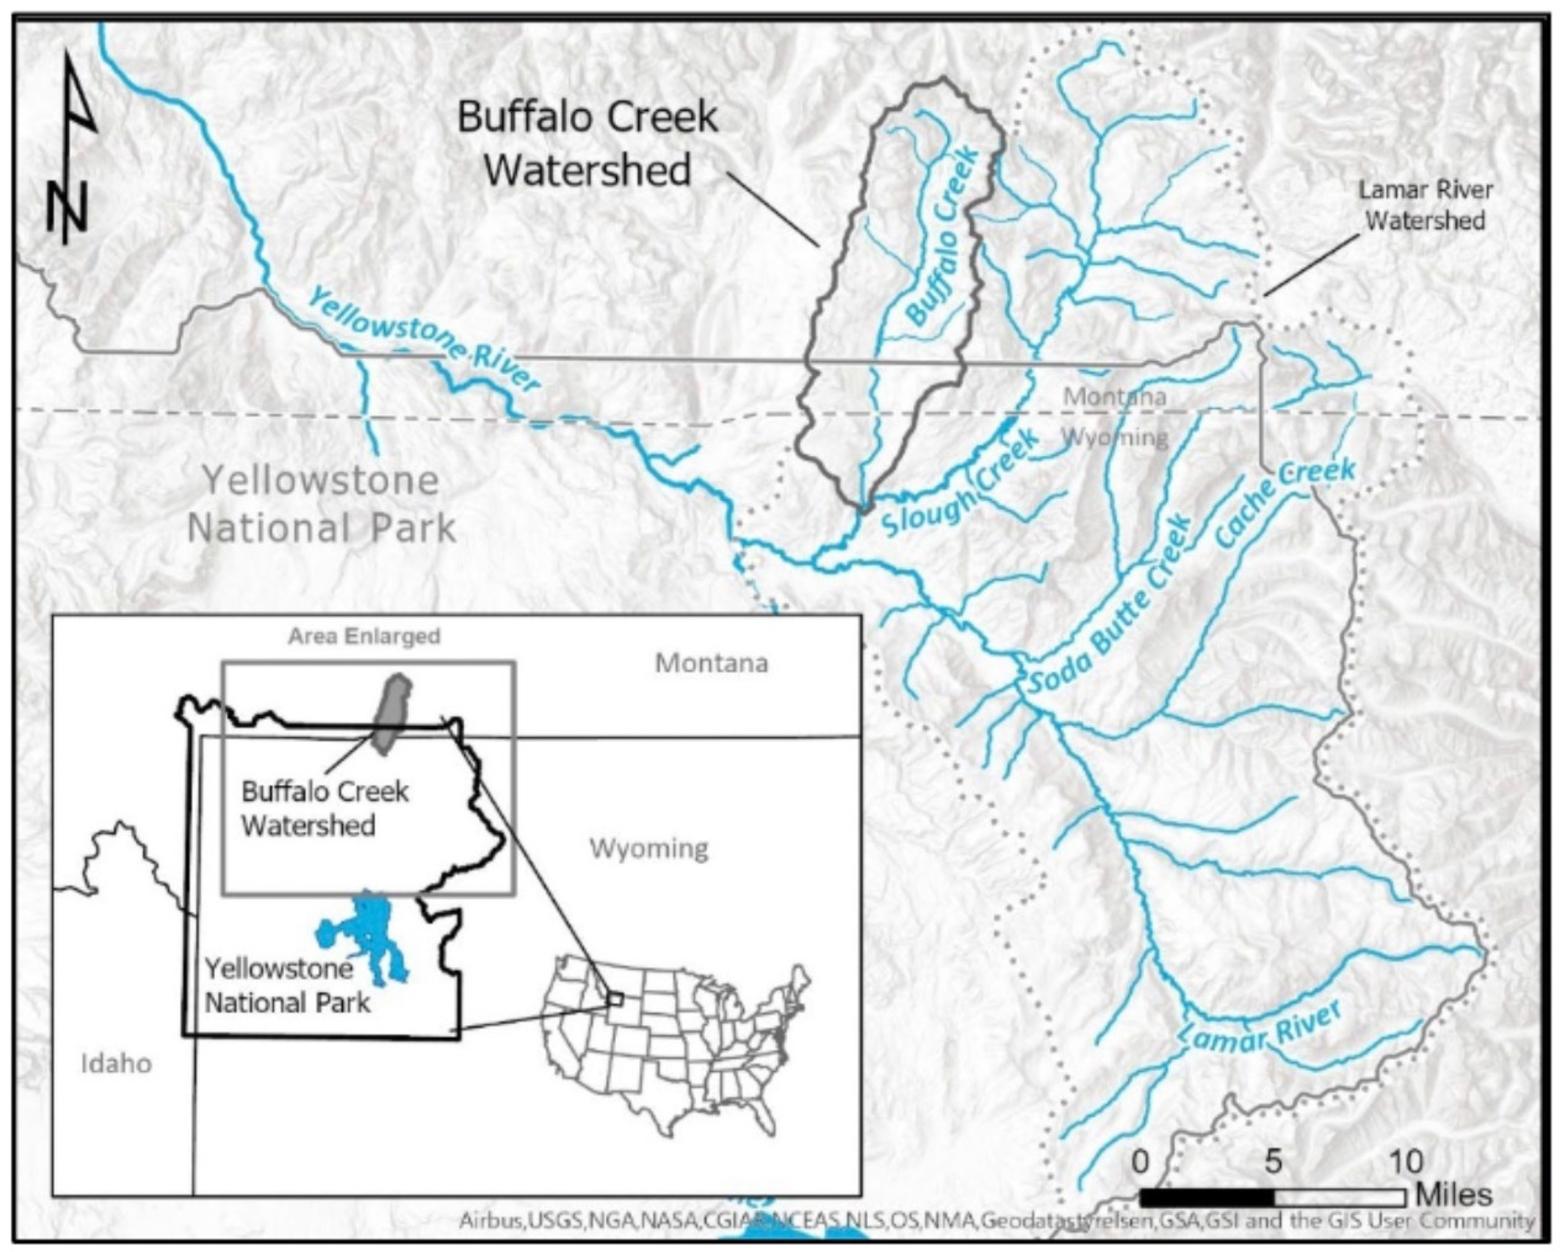 The Buffalo Creek project area within the larger Lamar River Watershed in the northeast section of Yellowstone National Park and southern Absaroka-Beartooth Wilderness. Map courtesy U.S. Forest Service. 